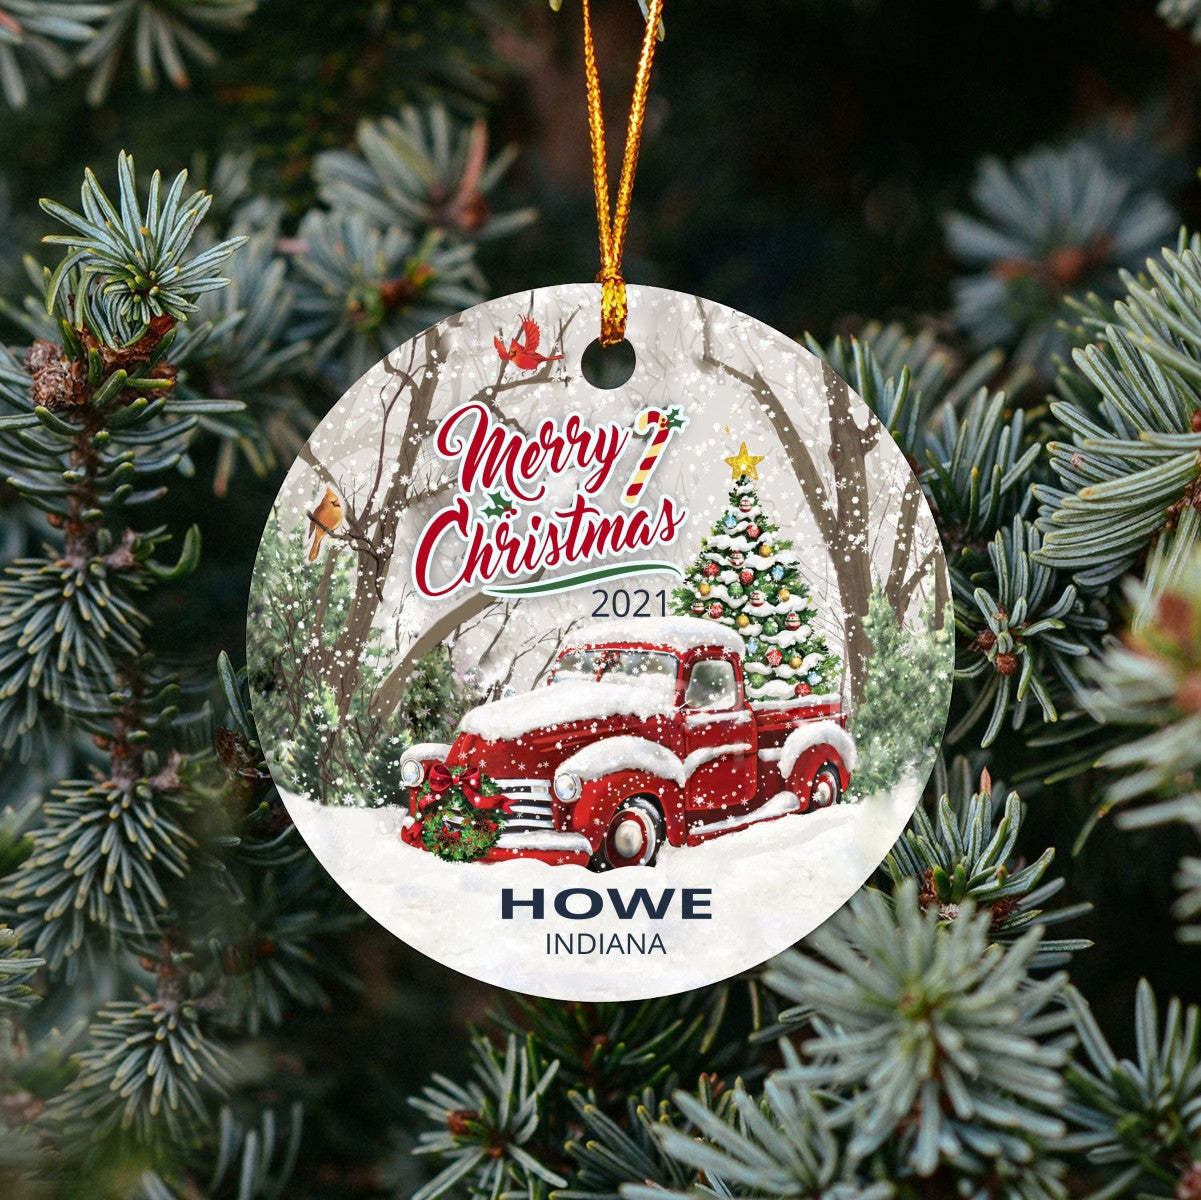 Christmas Tree Ornaments Howe - Ornament With Name City, State Howe Indiana IN Ornament - Red Truck Xmas Ornaments 3'' Plastic Gift For Family, Friend And Housewarming